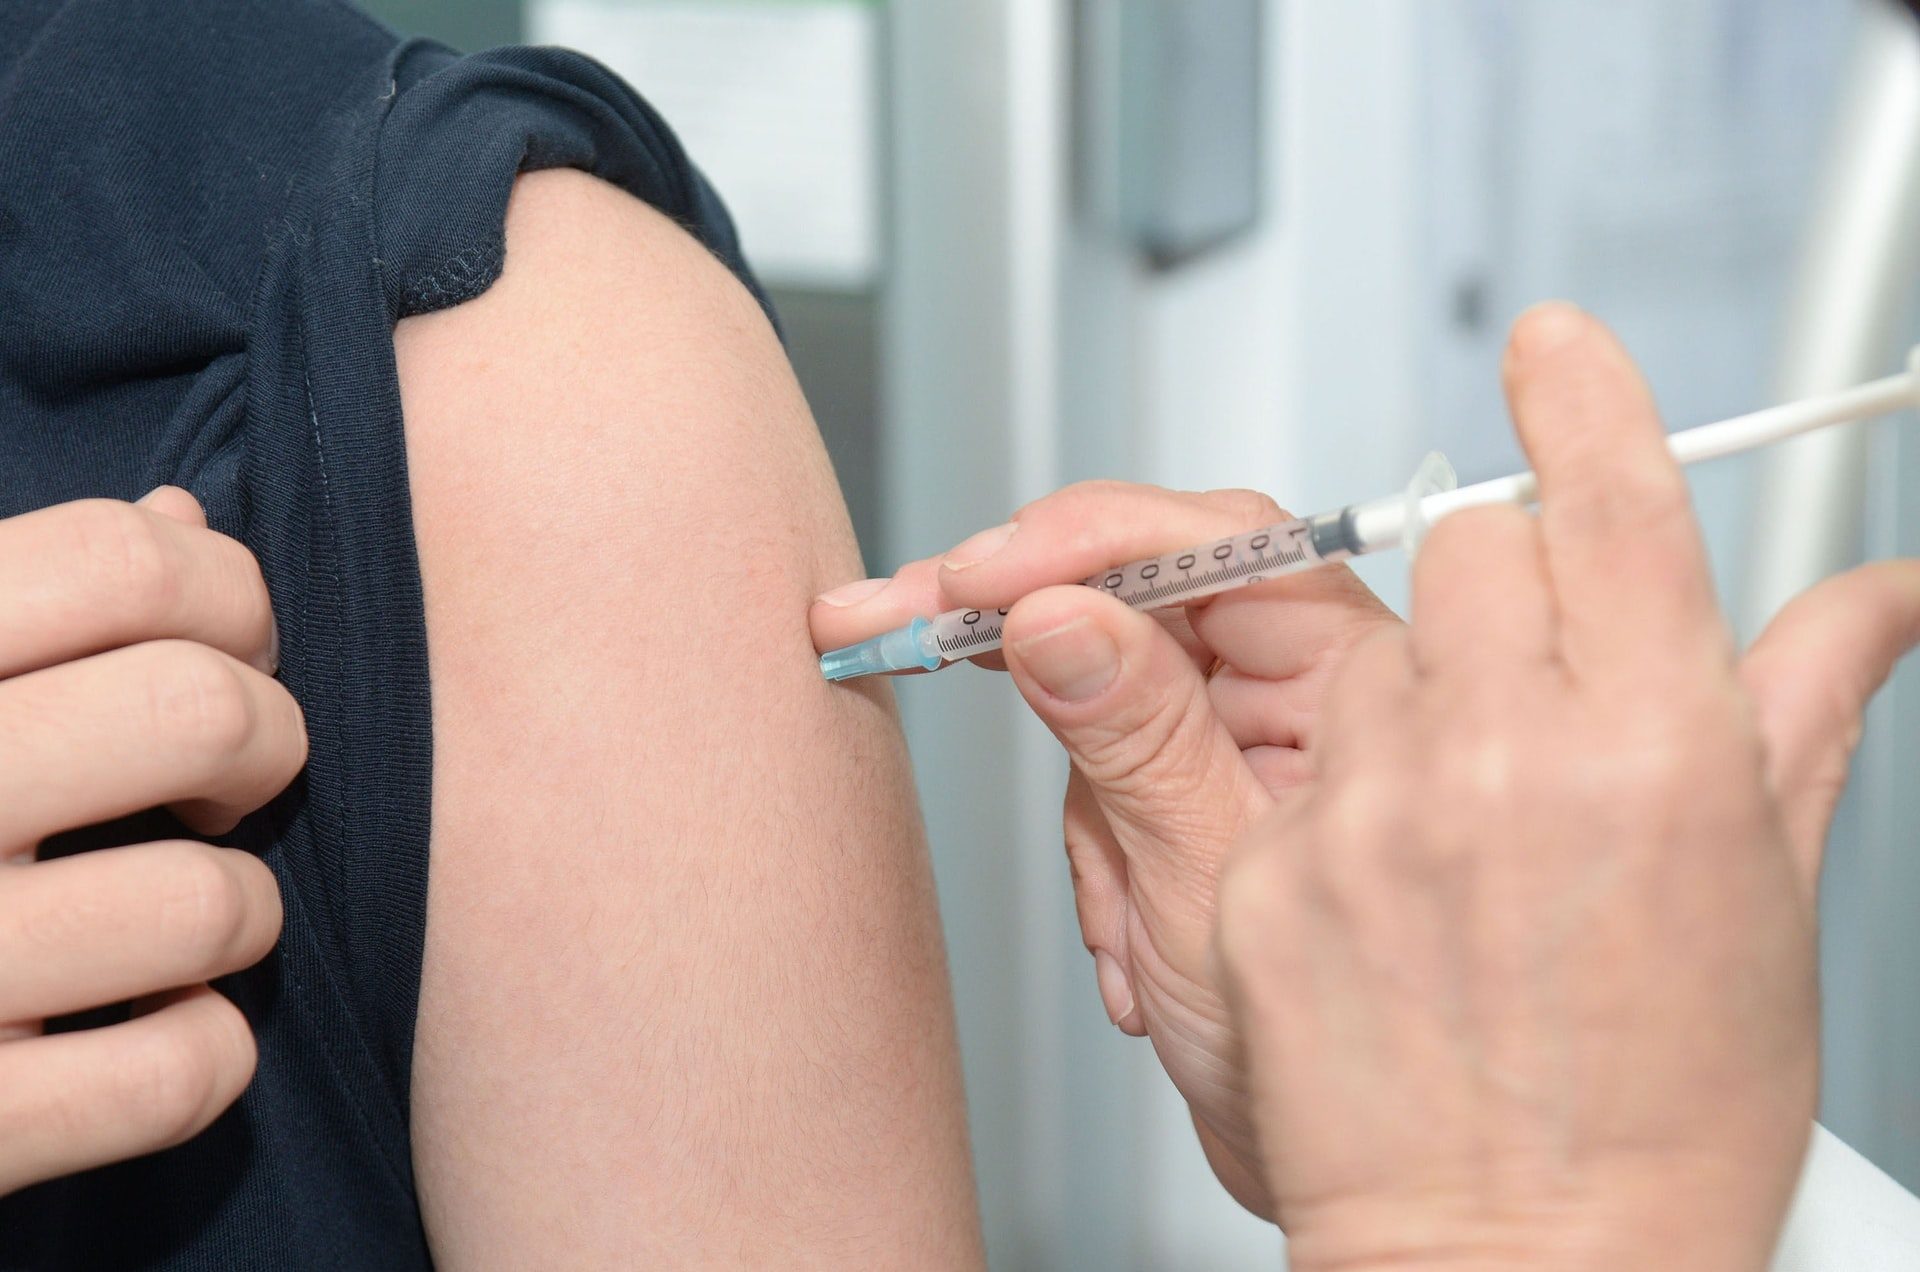 Have you had a flu jab yet?